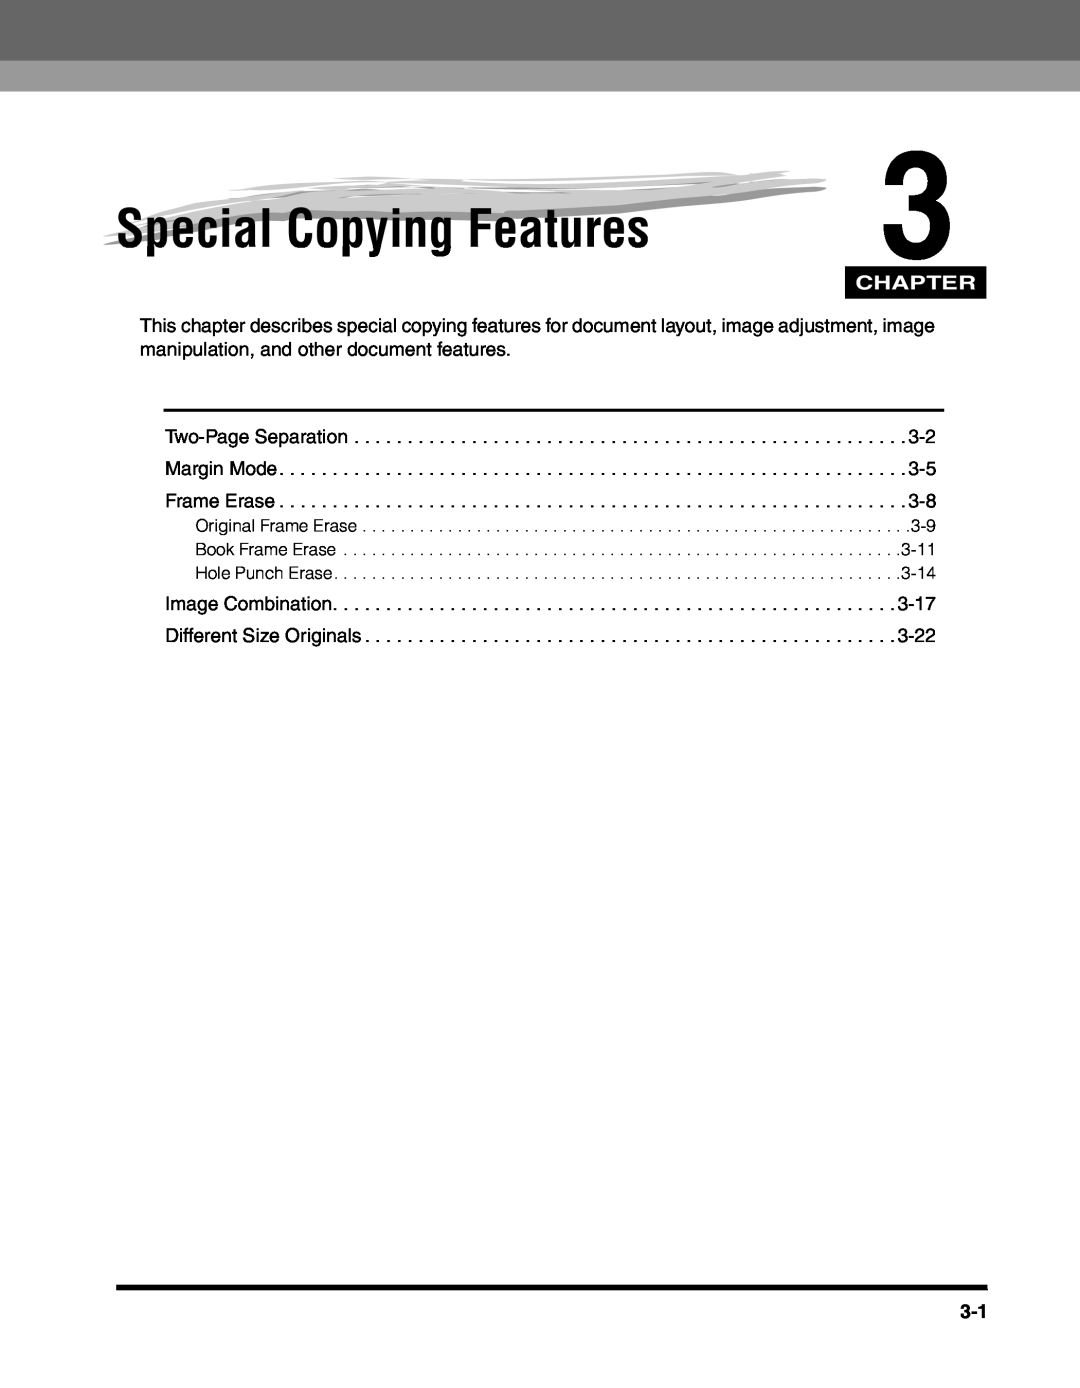 Canon 2010F manual Special Copying Features, Chapter 